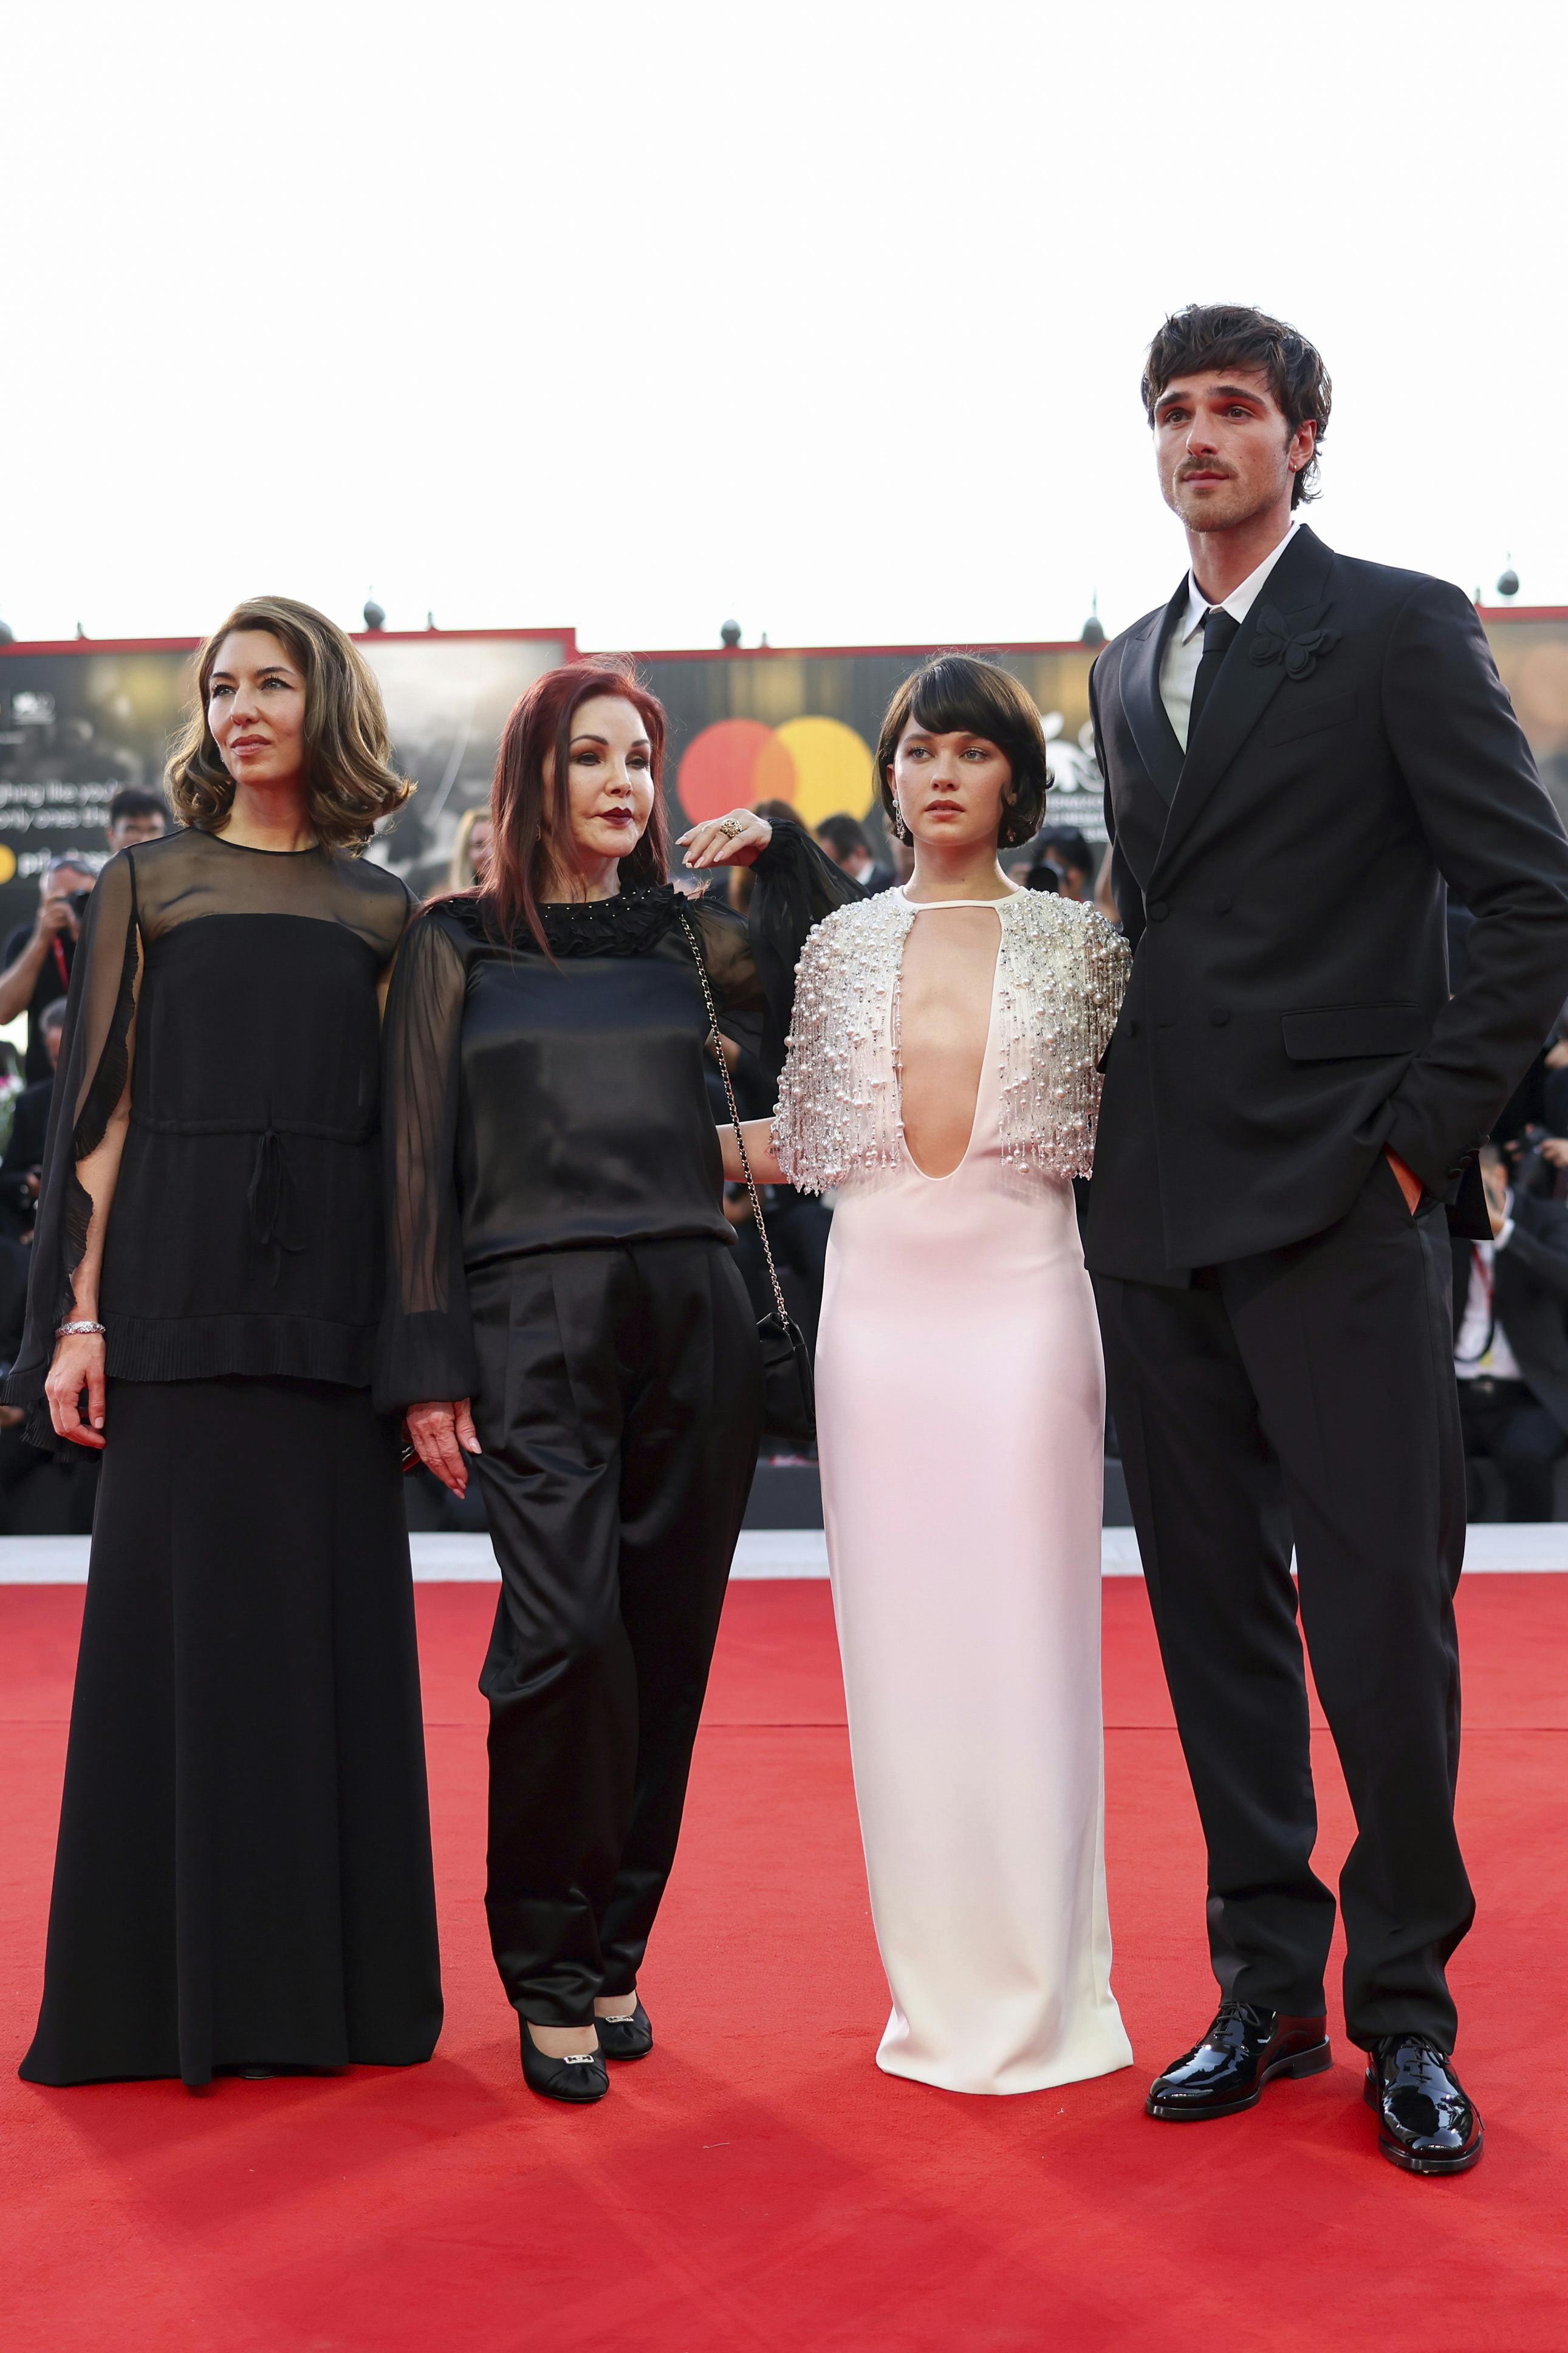 Director Sofia Coppola, from left, Priscilla Presley, Cailee Spaeny, and Jacob Elordi pose for photographers upon arrival for the premiere of the film 'Priscilla' during the 80th edition of the Venice Film Festival in Venice, Italy, on Monday, Sept. 4, 2023. (Photo by Vianney Le Caer/Invision/AP)